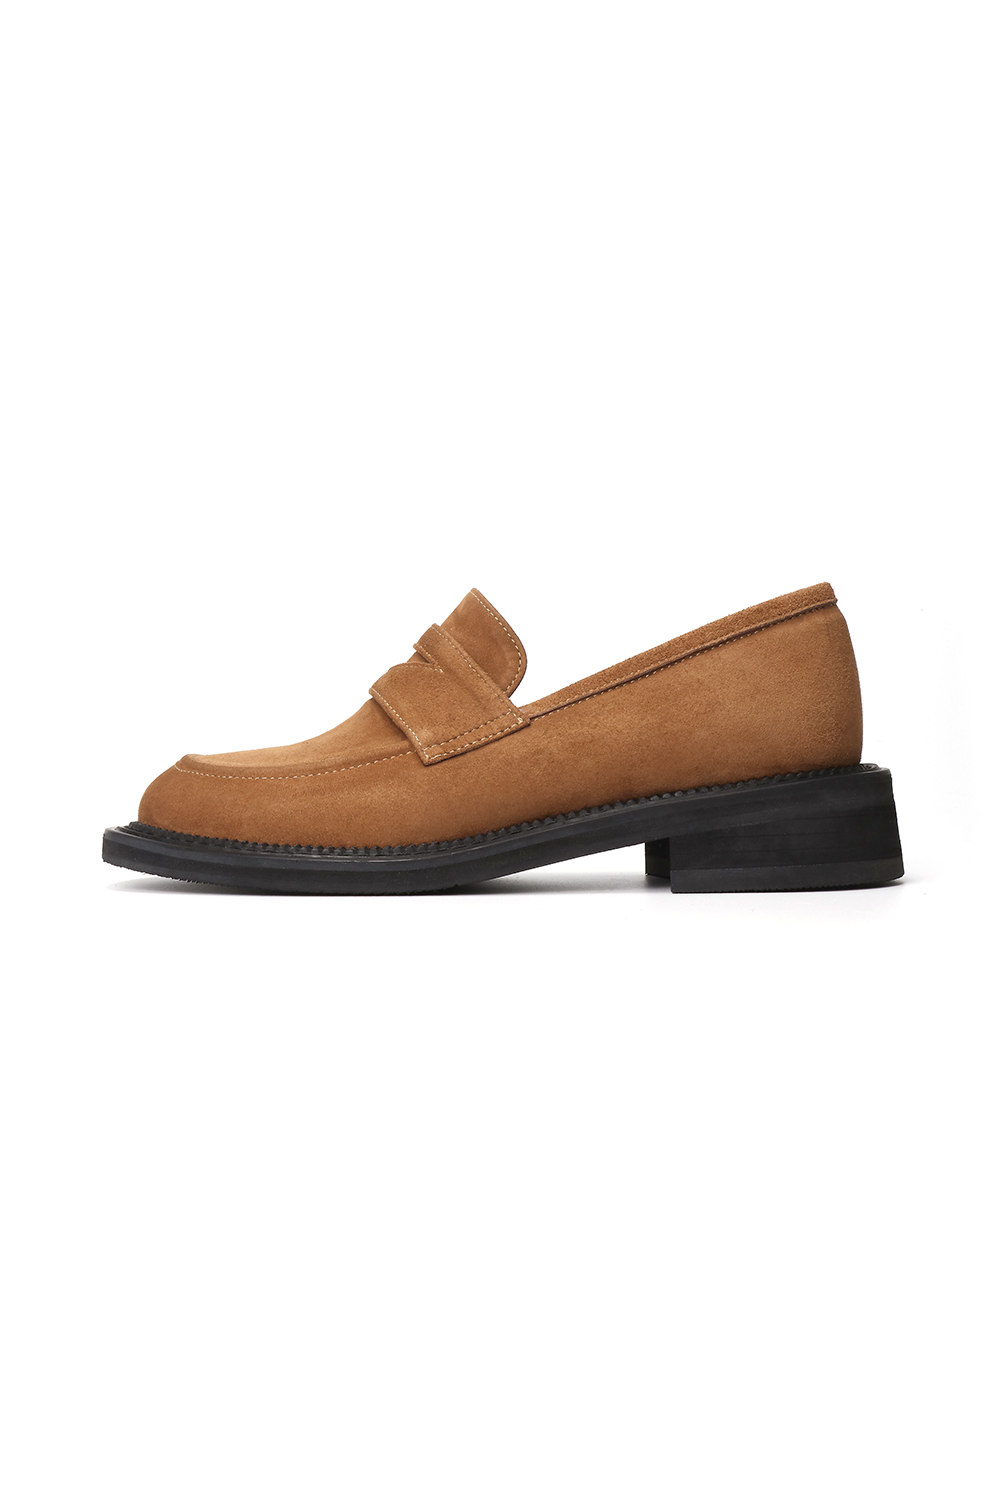 MANDY ROUND PENNY LOAFER [CAMEL SUEDE]